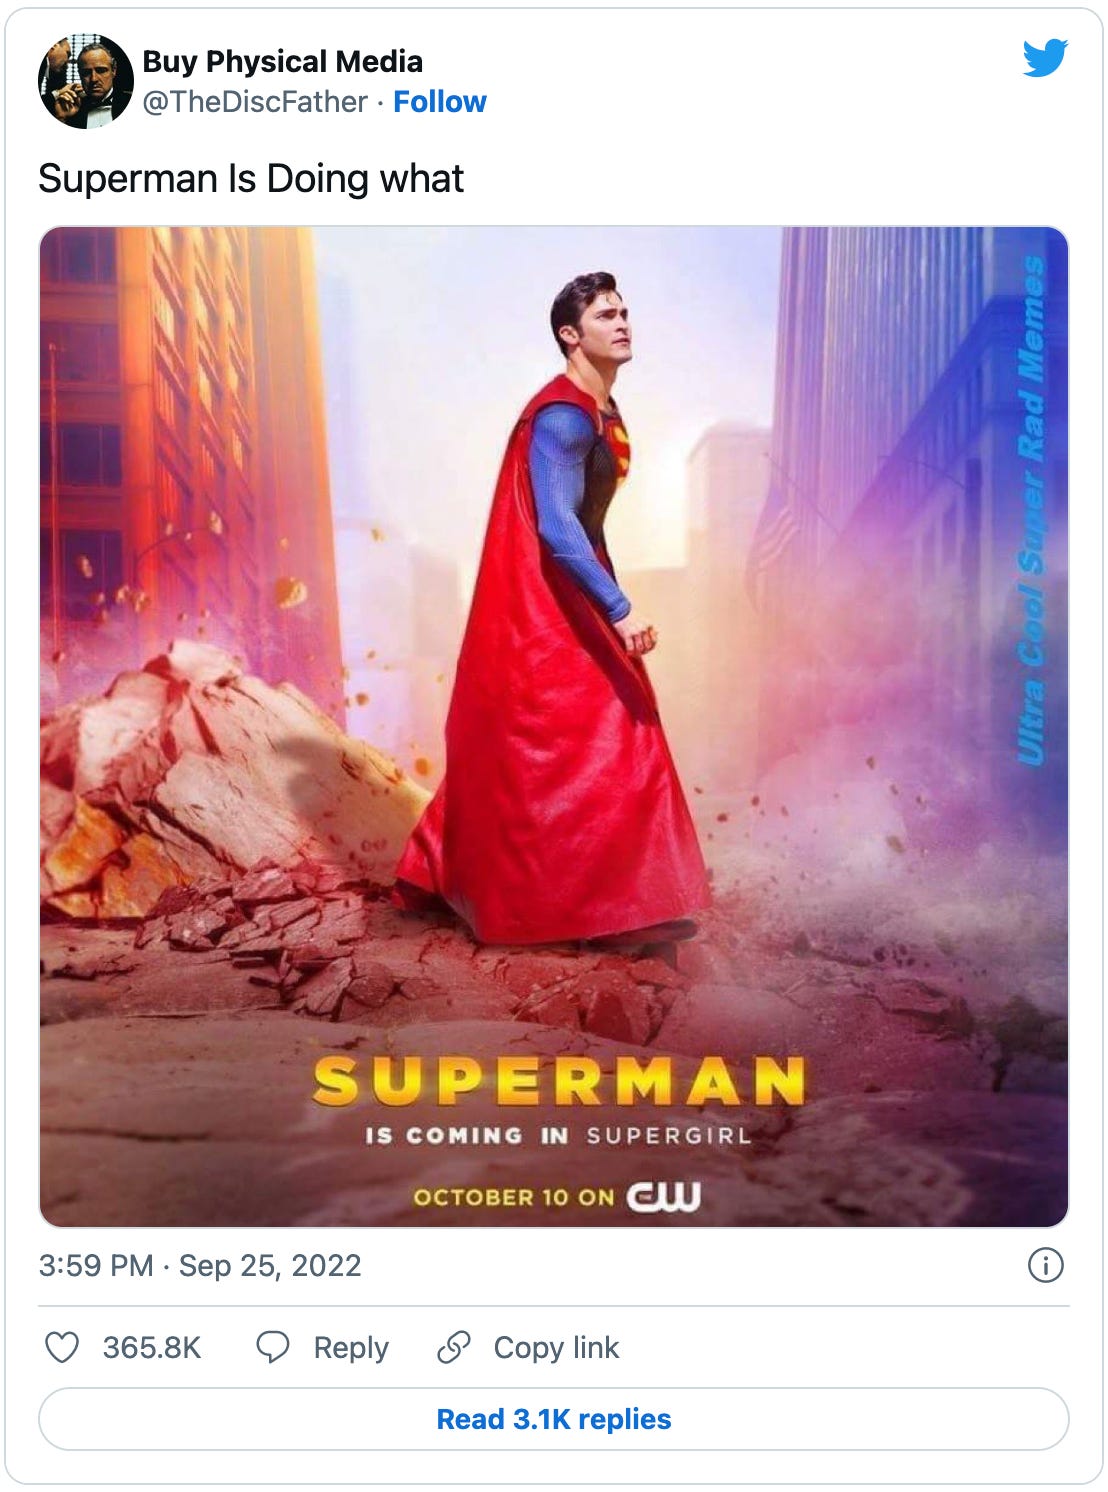 Tweet by @TheDiscFather that reads “Superman is Doing what” above a regrettably fake promo poster for the CW series “Supergirl” that shows a picture of Superman doing something destructive to a city street above the tagline: “SUPERMAN is coming in Supergirl, October 10 on CW.” Again the original poster said “coming TO Supergirl,” as you would assume. 